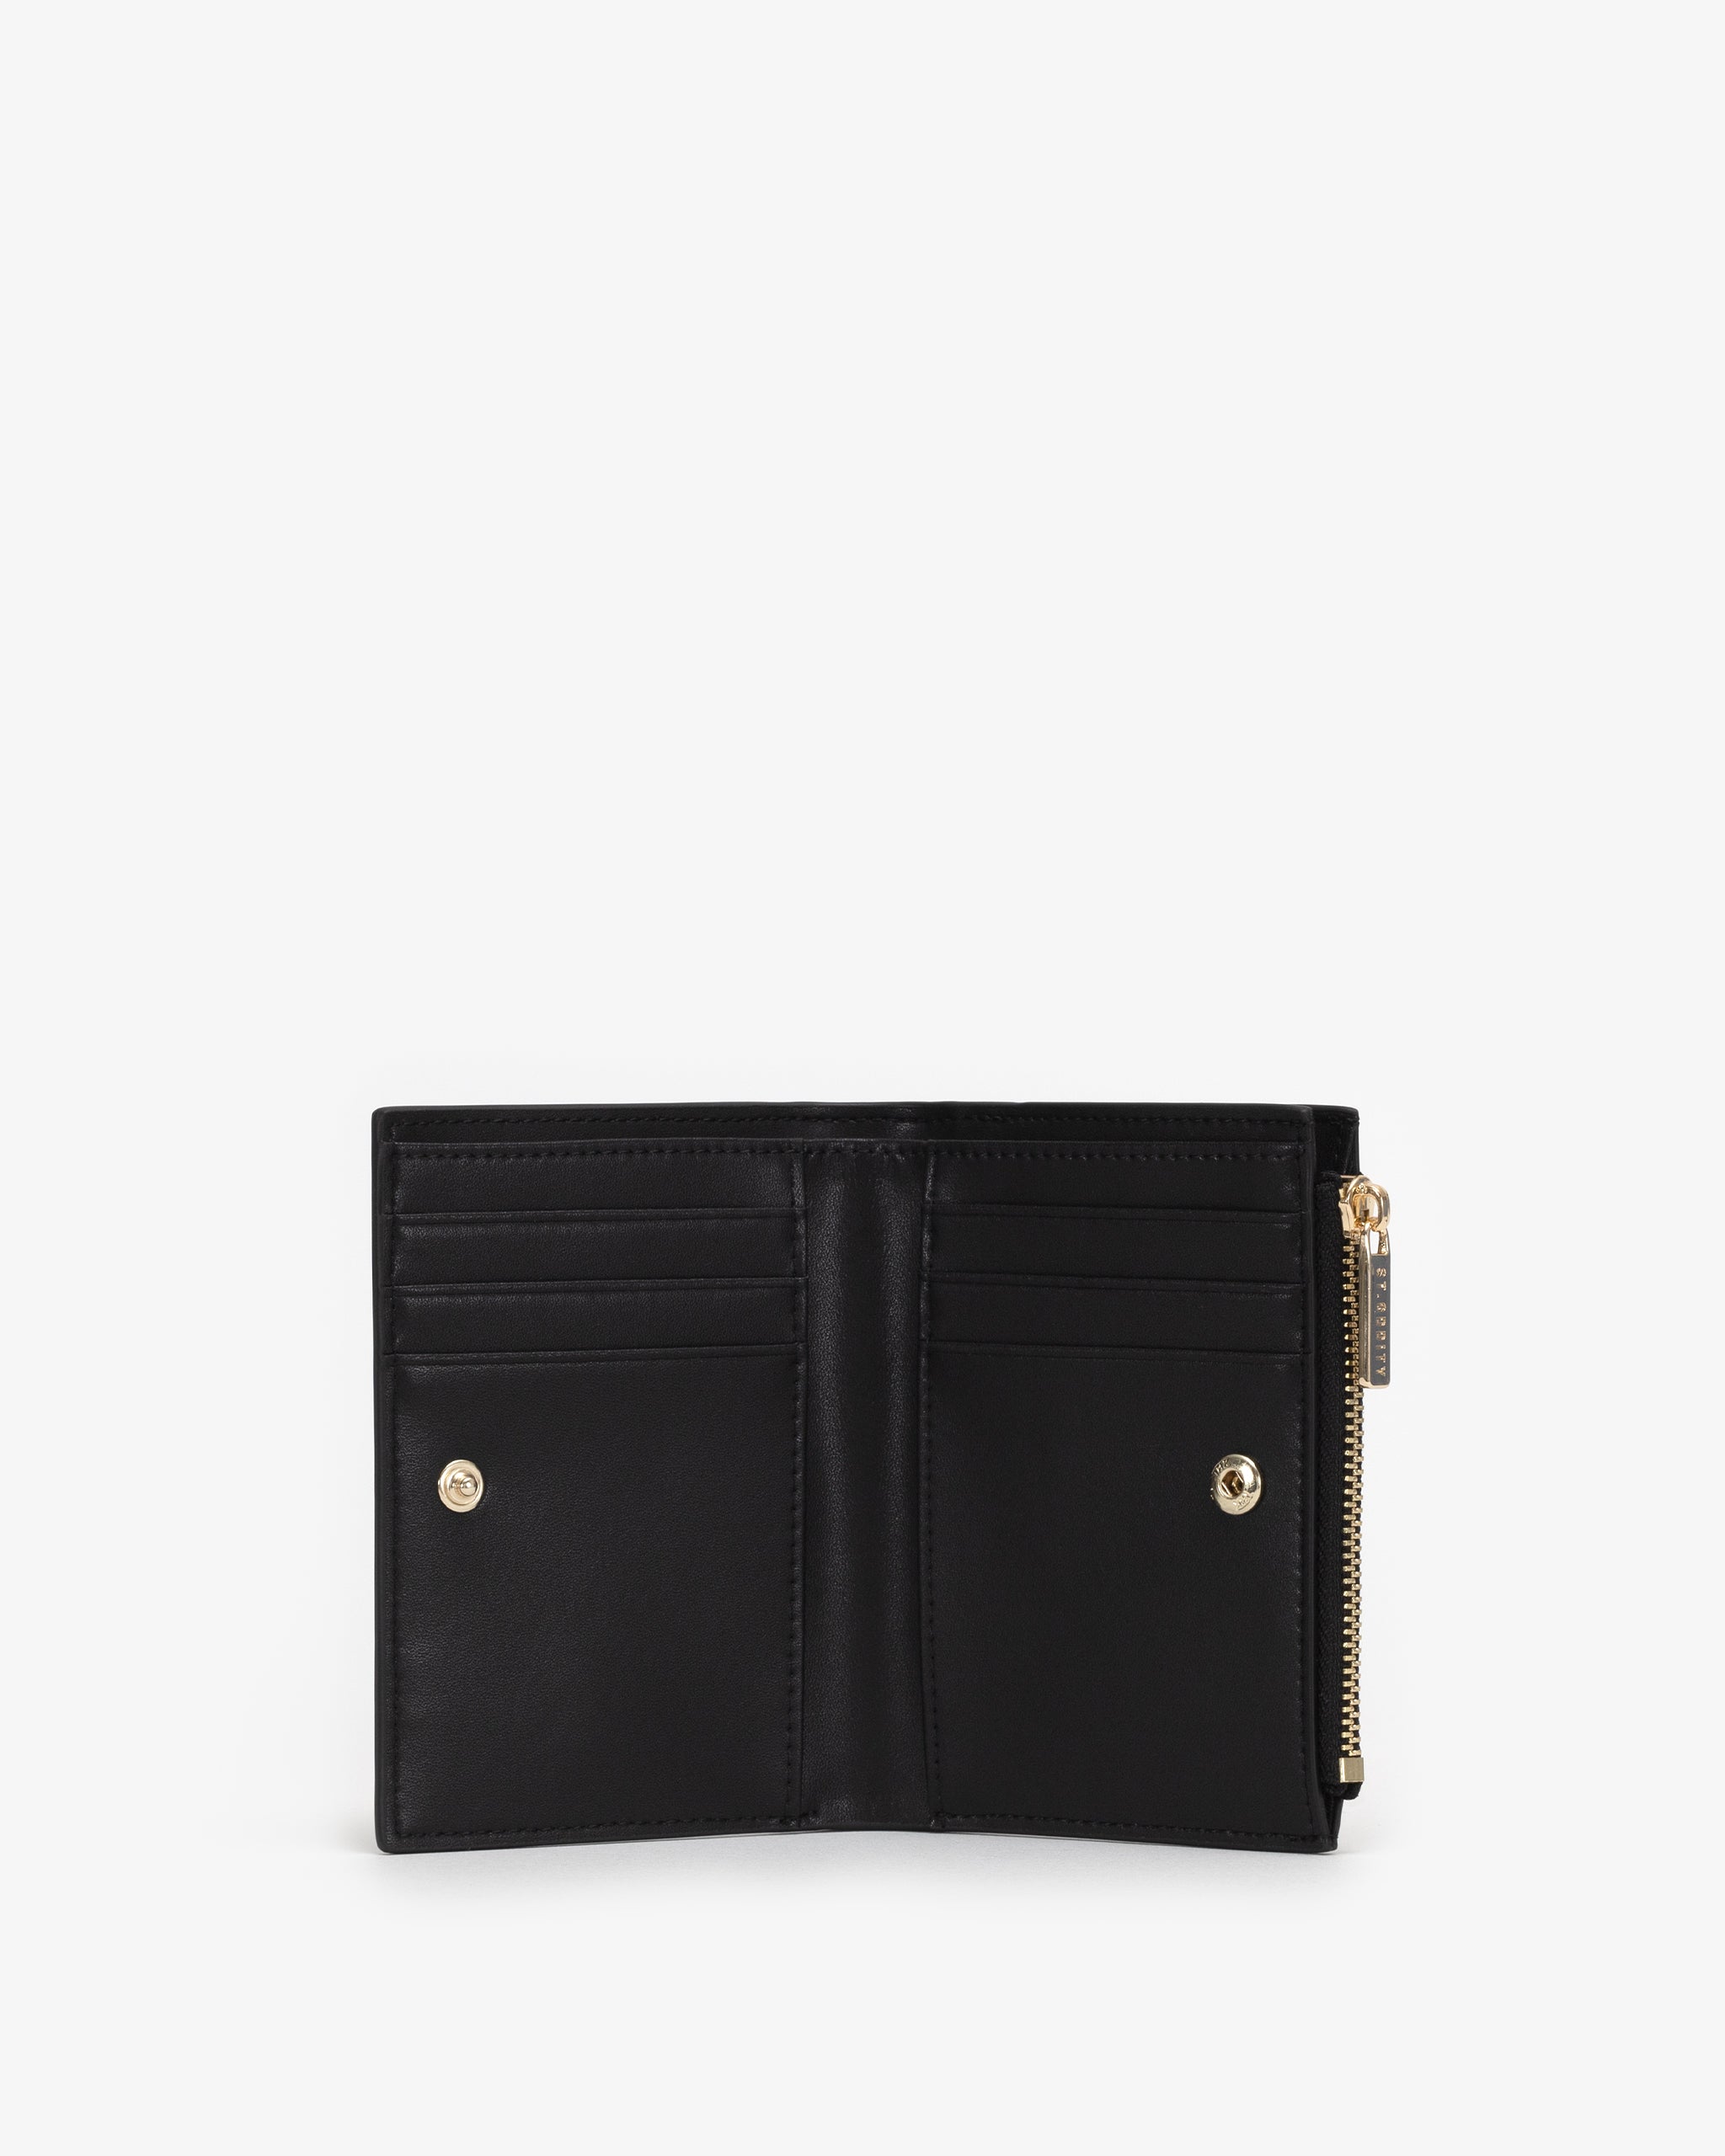 Wallet in Black/Gold with Personalised Hardware